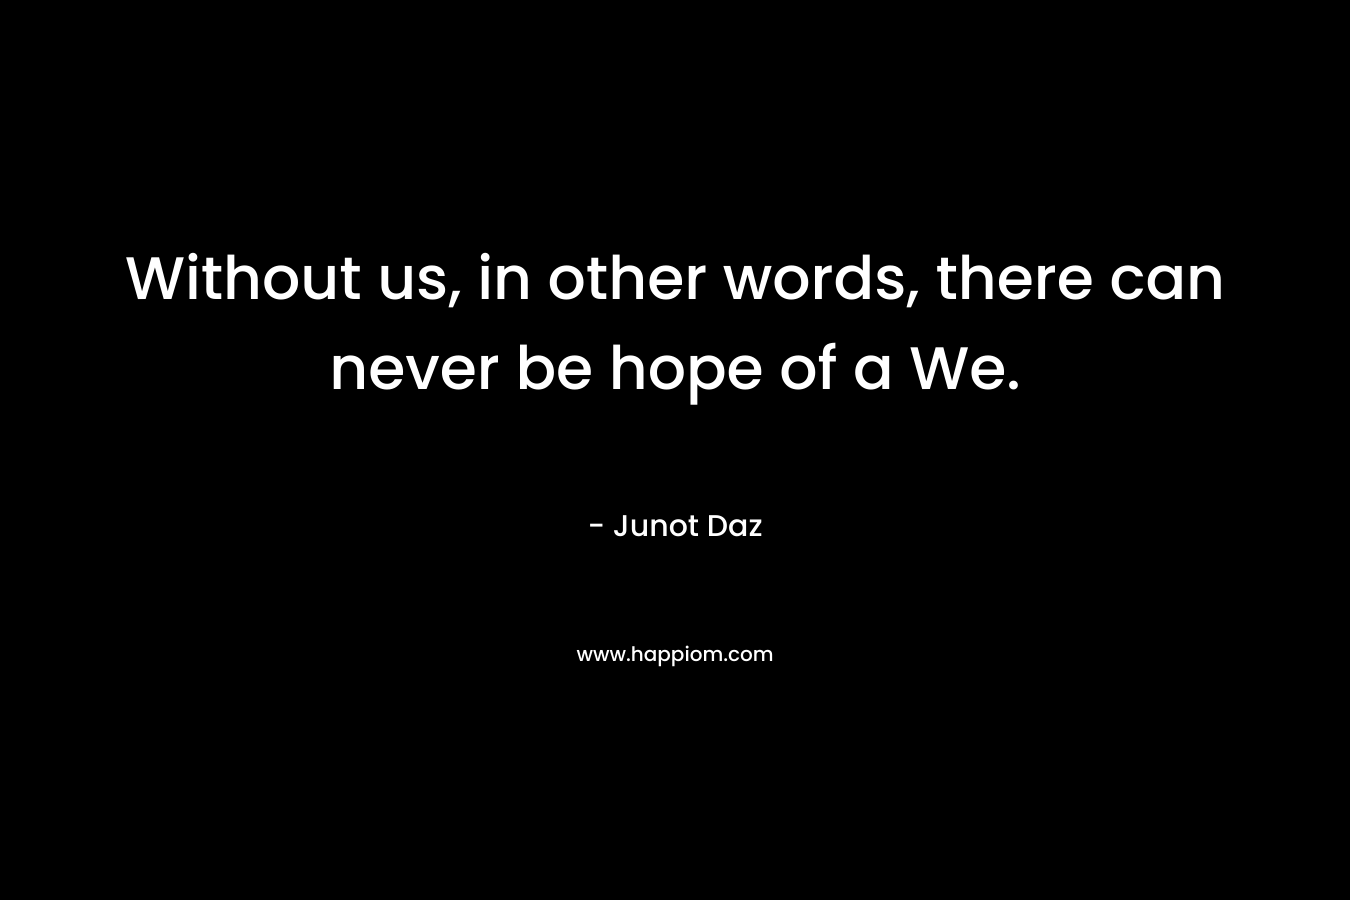 Without us, in other words, there can never be hope of a We. – Junot Daz